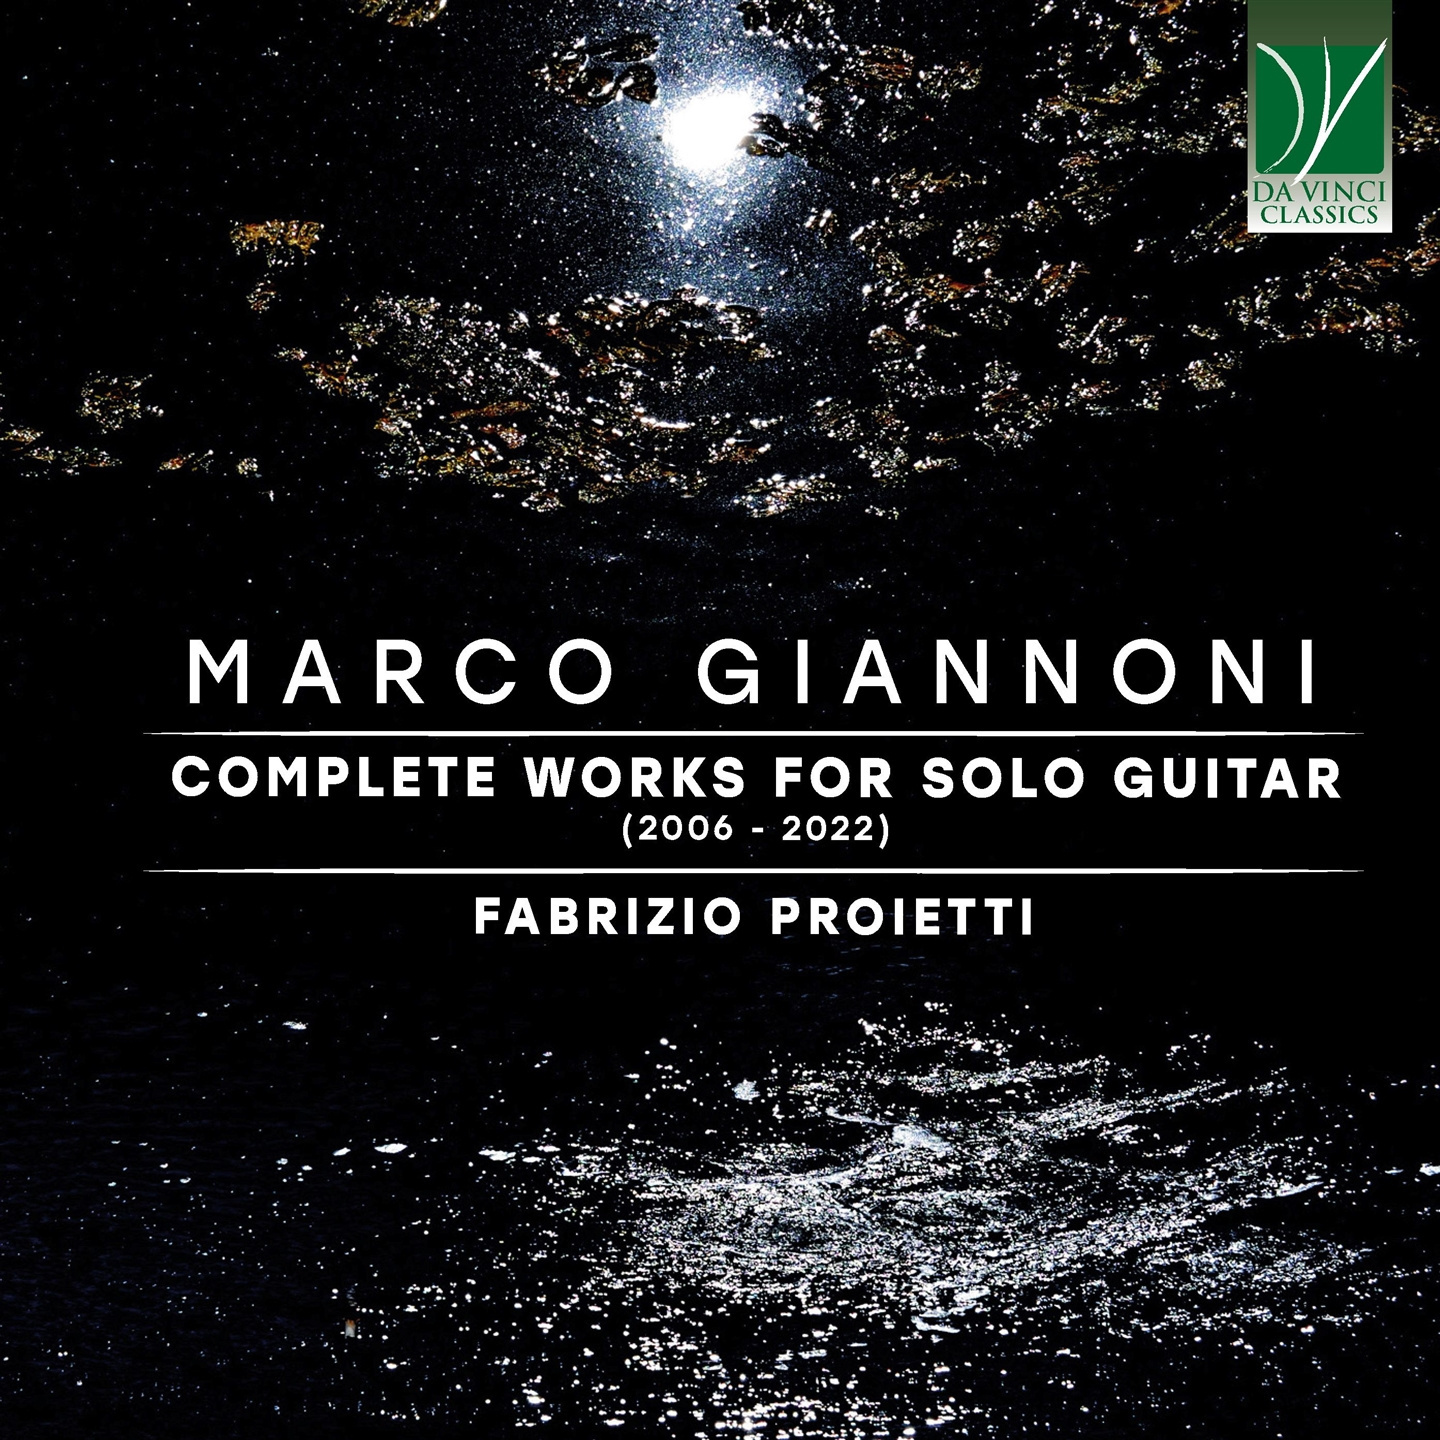 MARCO GIANNONI: COMPLETE WORKS FOR SOLO GUITAR (2006 - 2022)